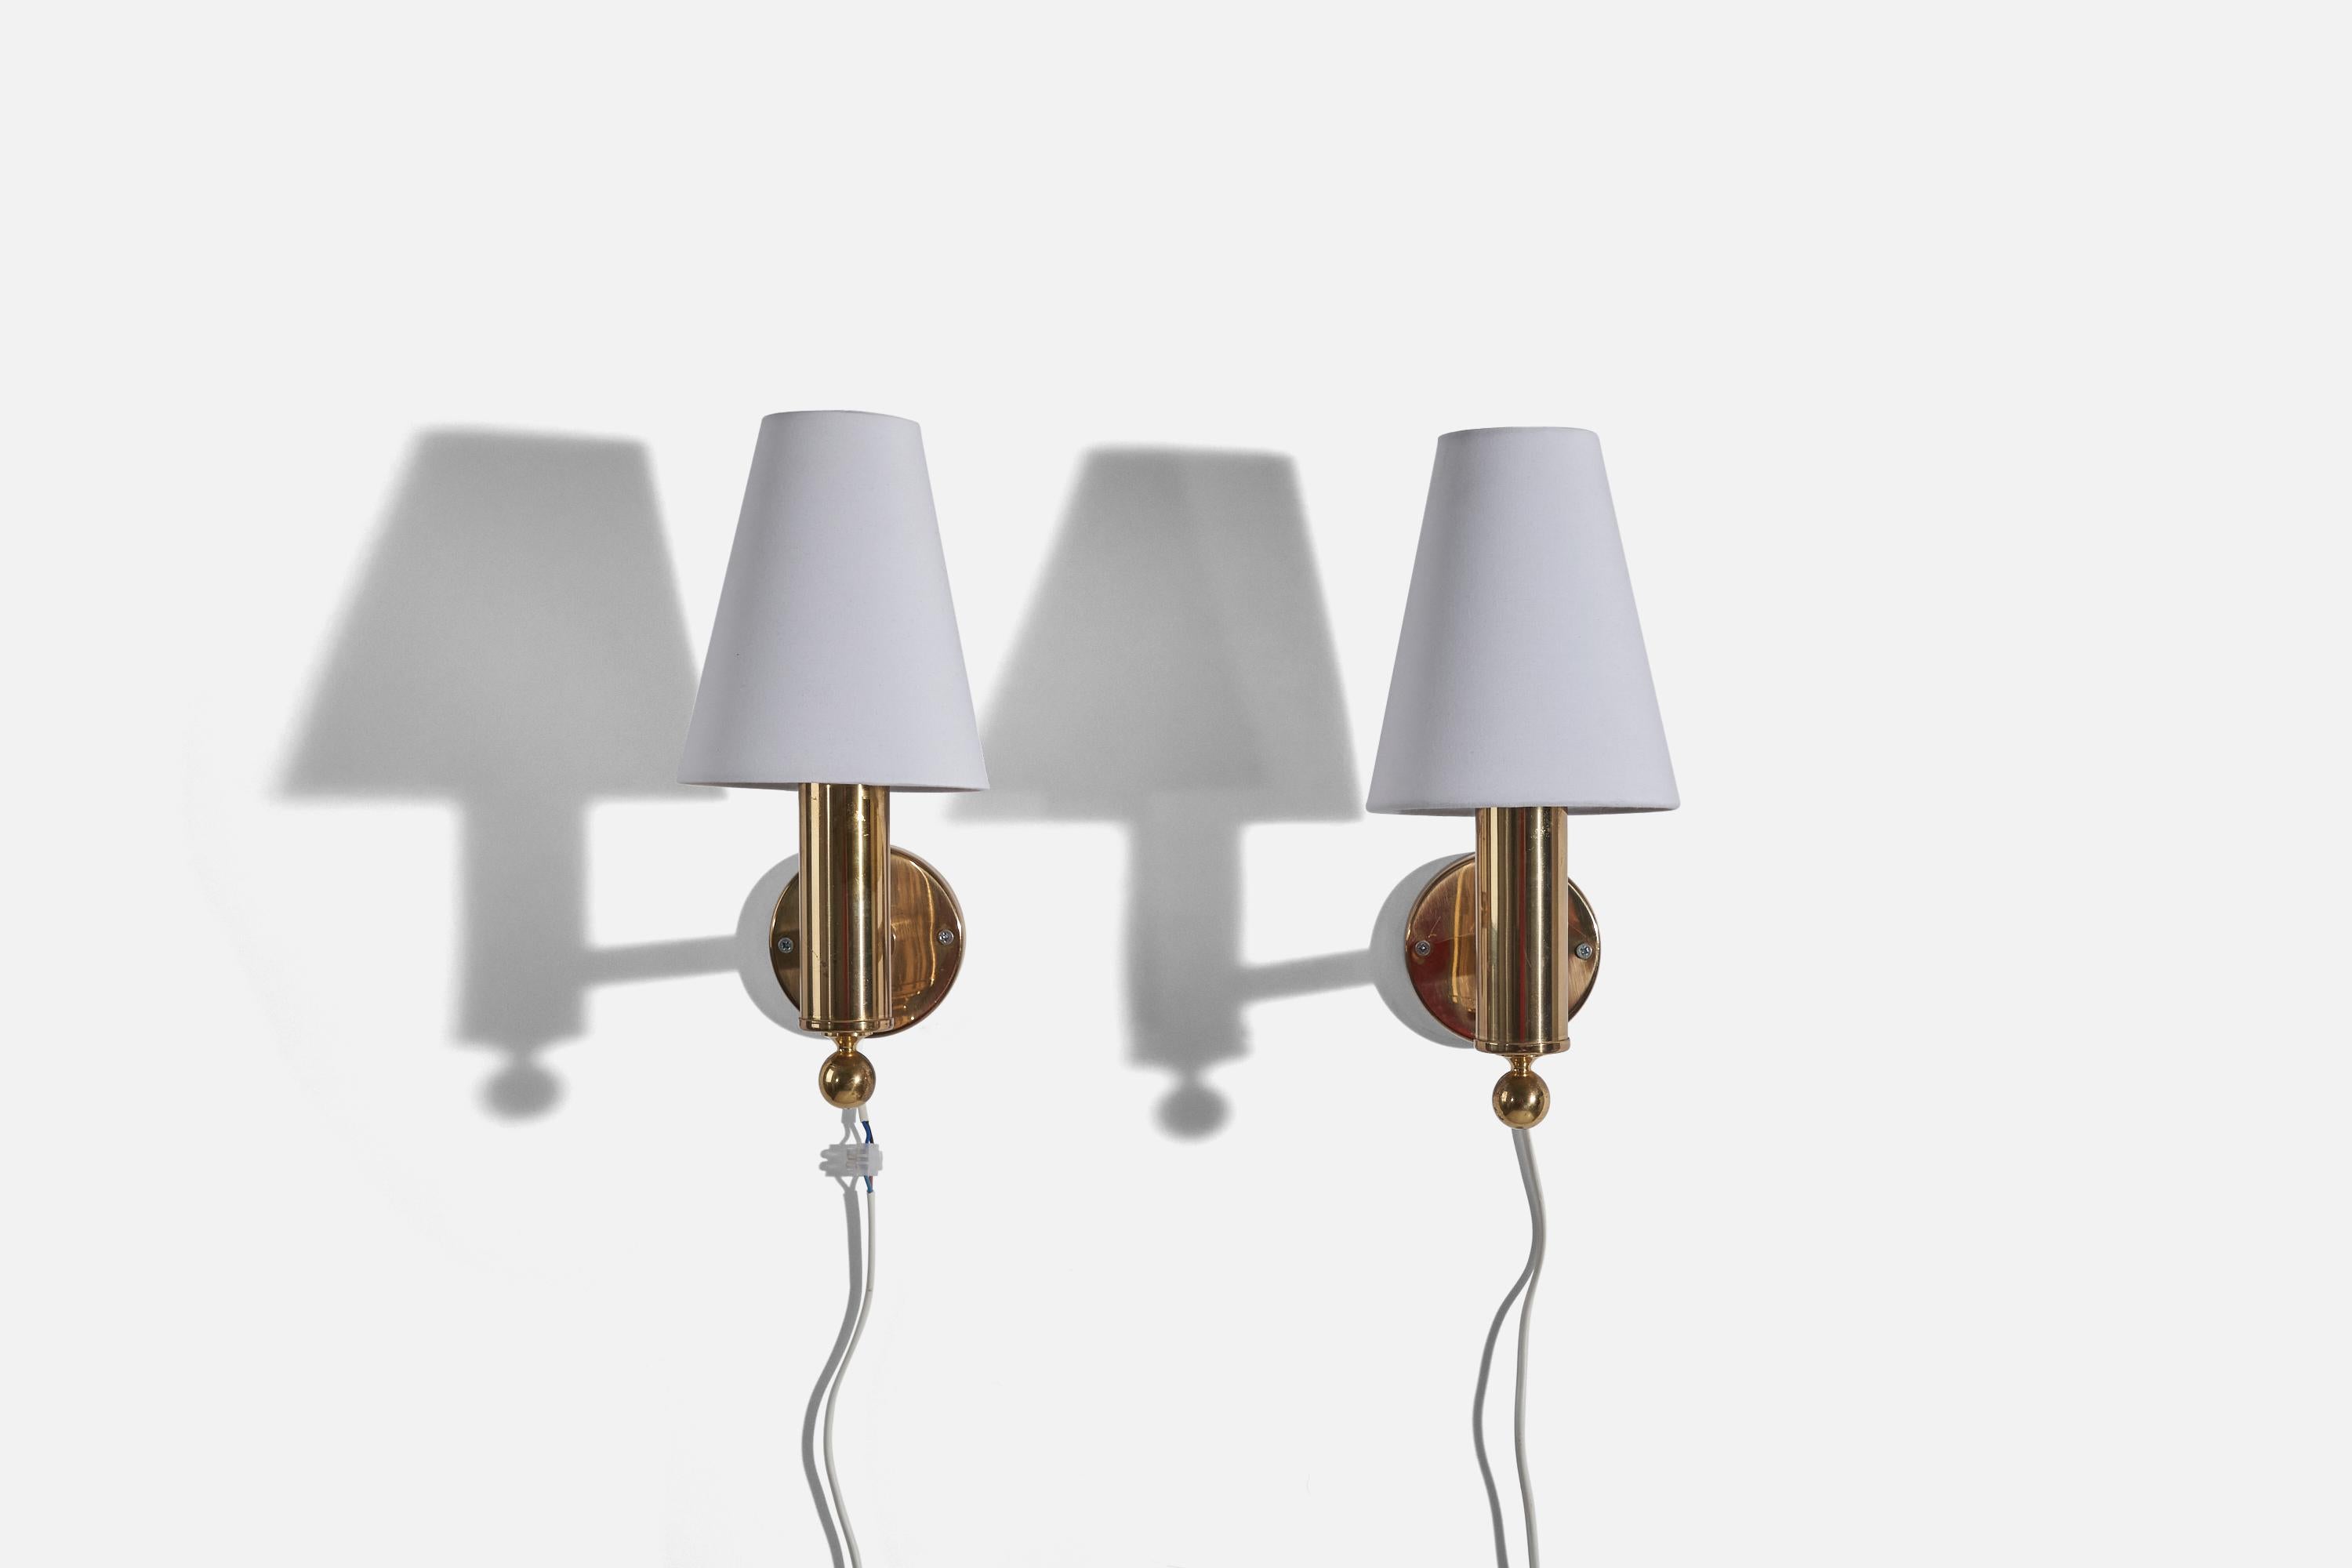 A pair of brass and fabric wall lights designed and produced by Bergboms, Sweden, c. 1970s. 

Sold with lampshades.
Dimensions of Sconce (inches) : 7.5 x 3.875 x 7.5 (H x W x D)
Dimensions of Shade (inches) : 2.875 x 5.5 x 6.75 (T x B x